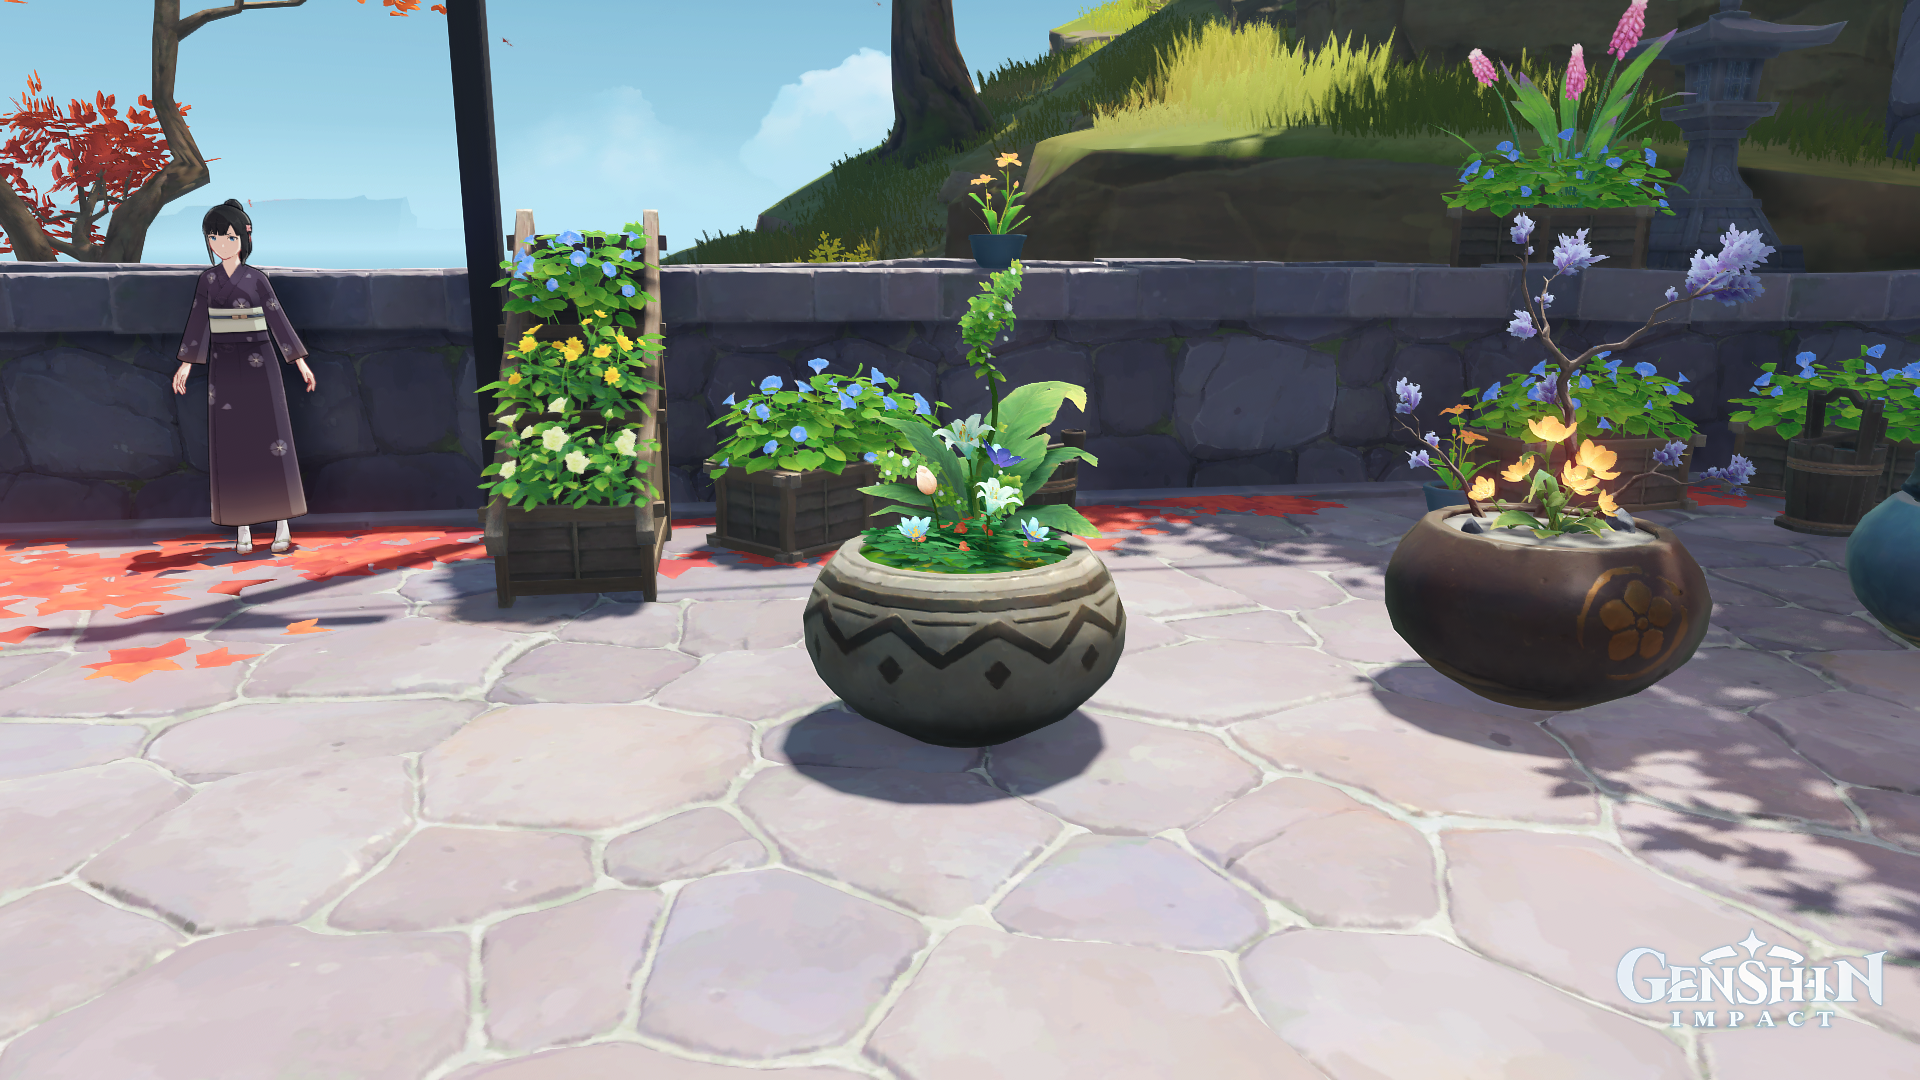 Genshin Impact Floral Courtyard guide (Day 1): How to construct Floral theme